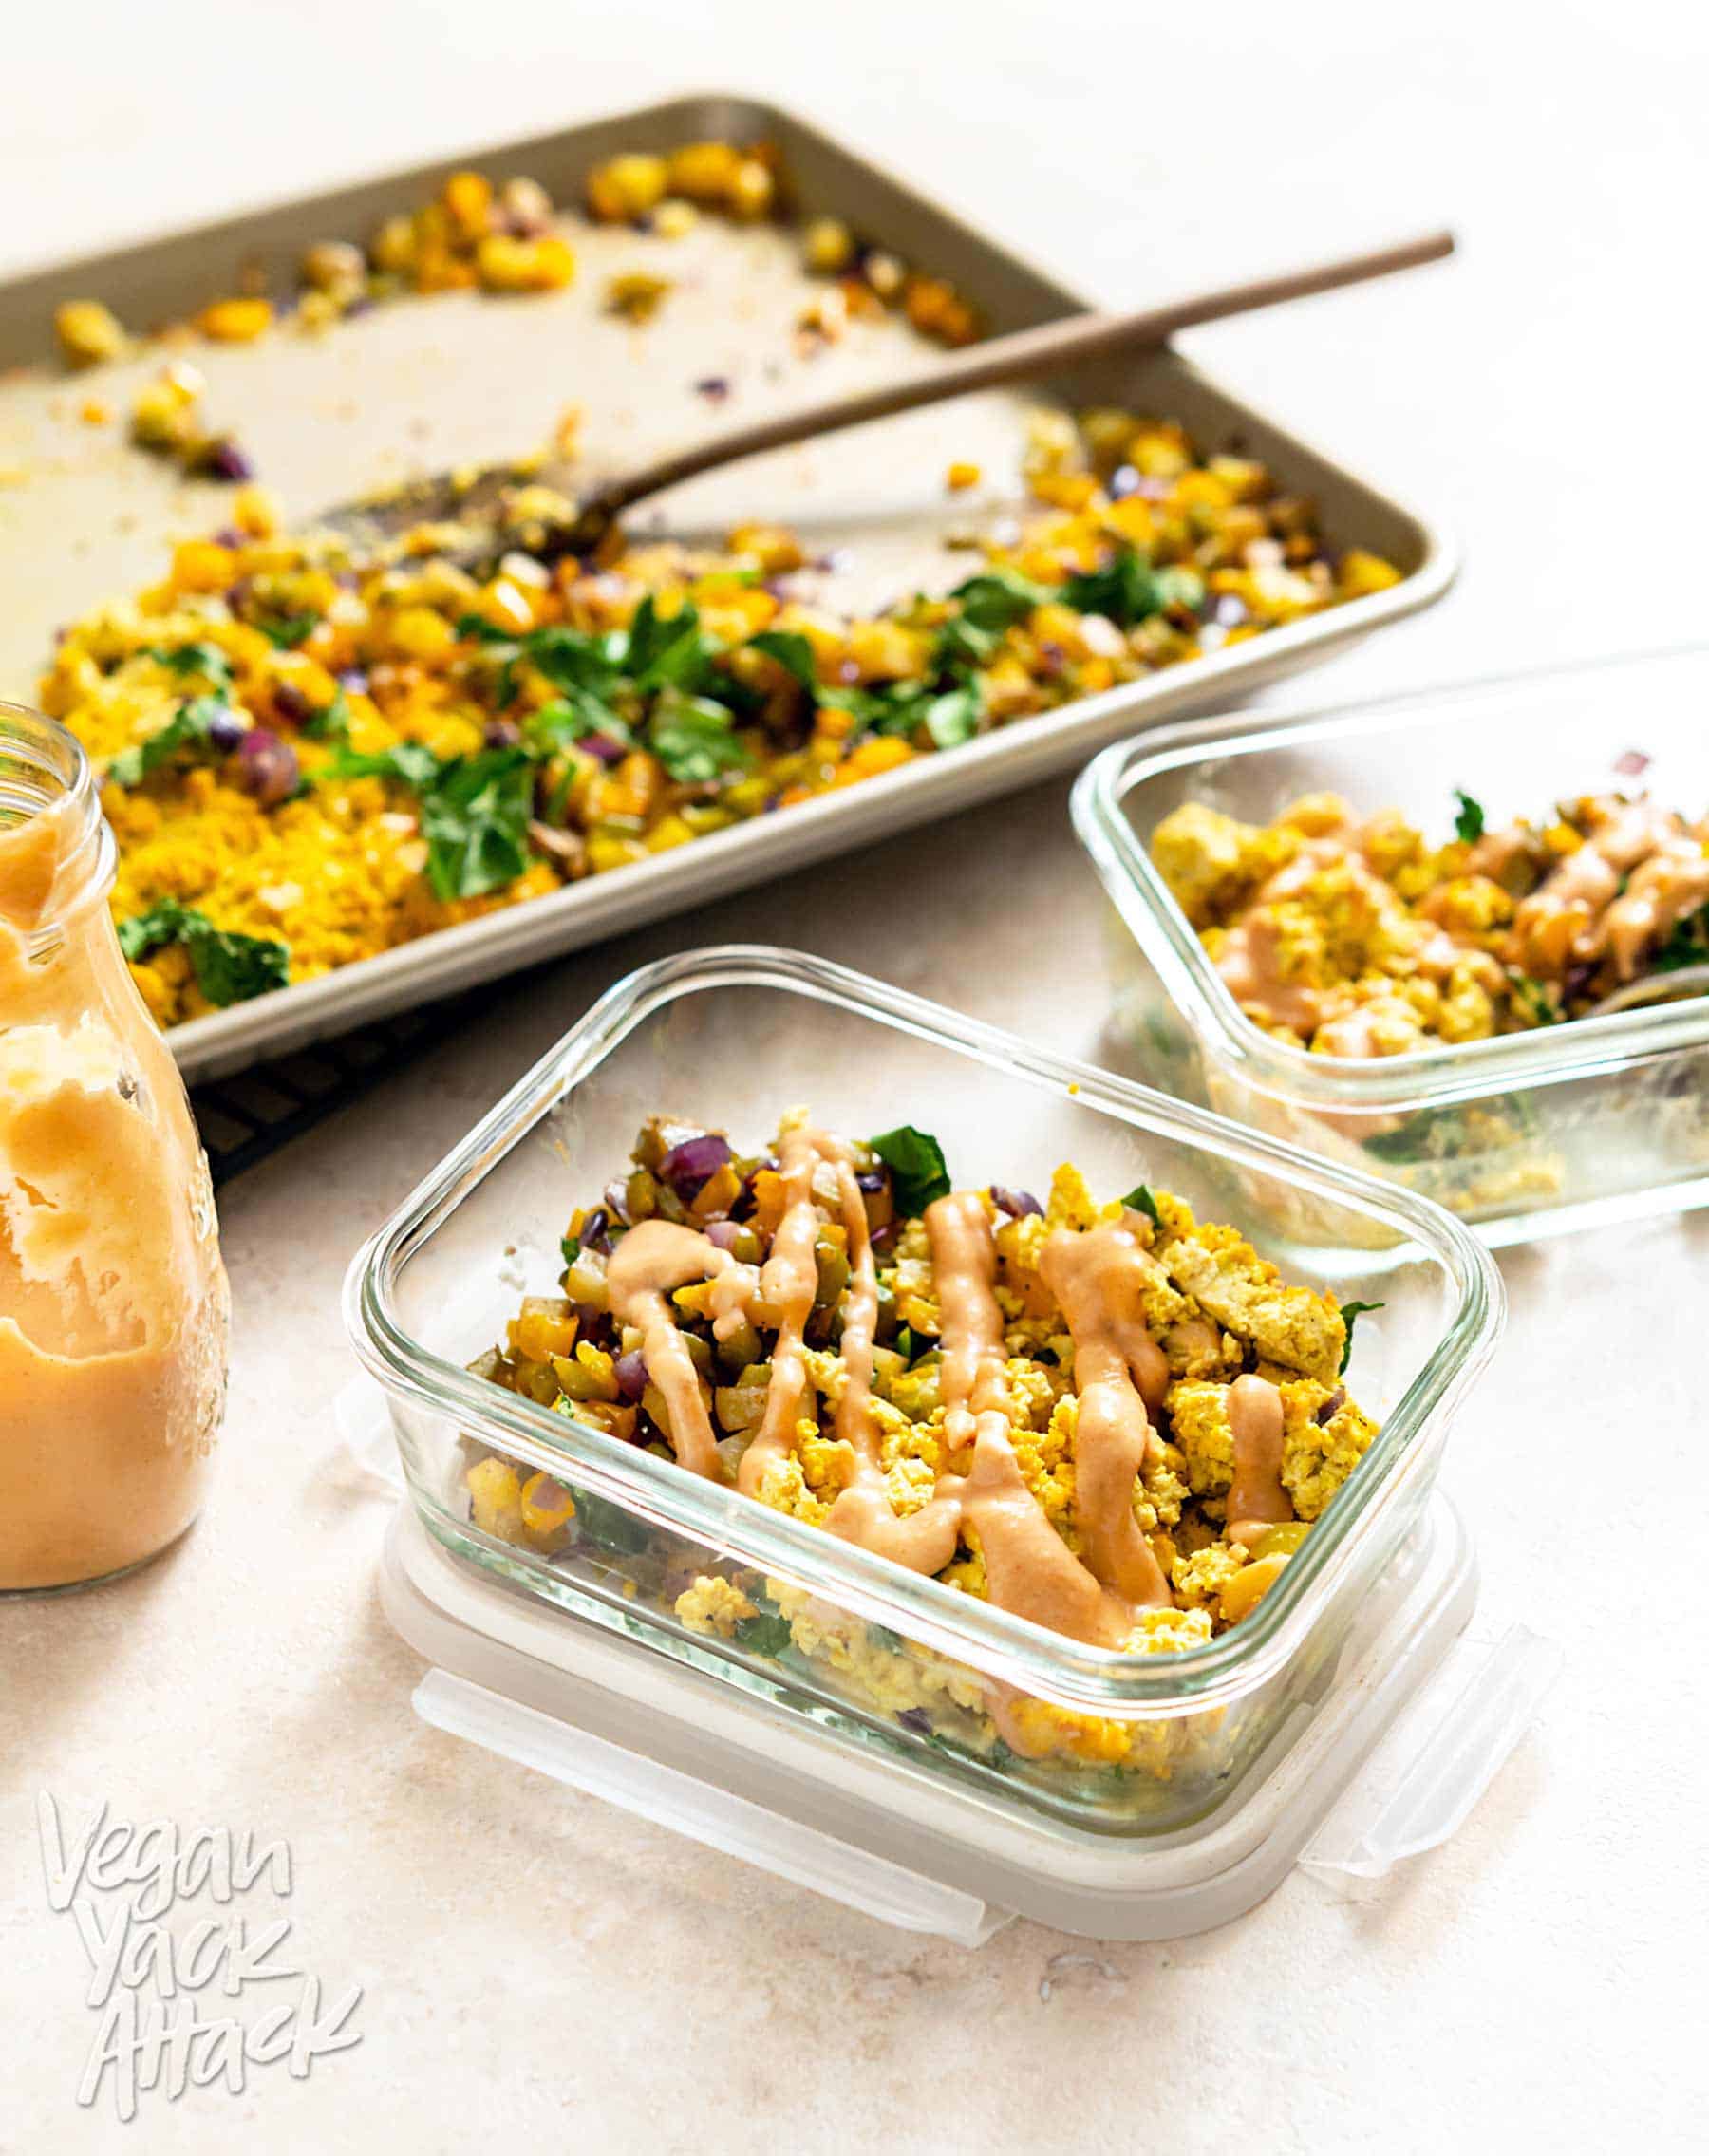 Two meal prep containers filled with Sheet Pan Tofu Scramble and hash, drizzled with sauce, next to a sheet pan